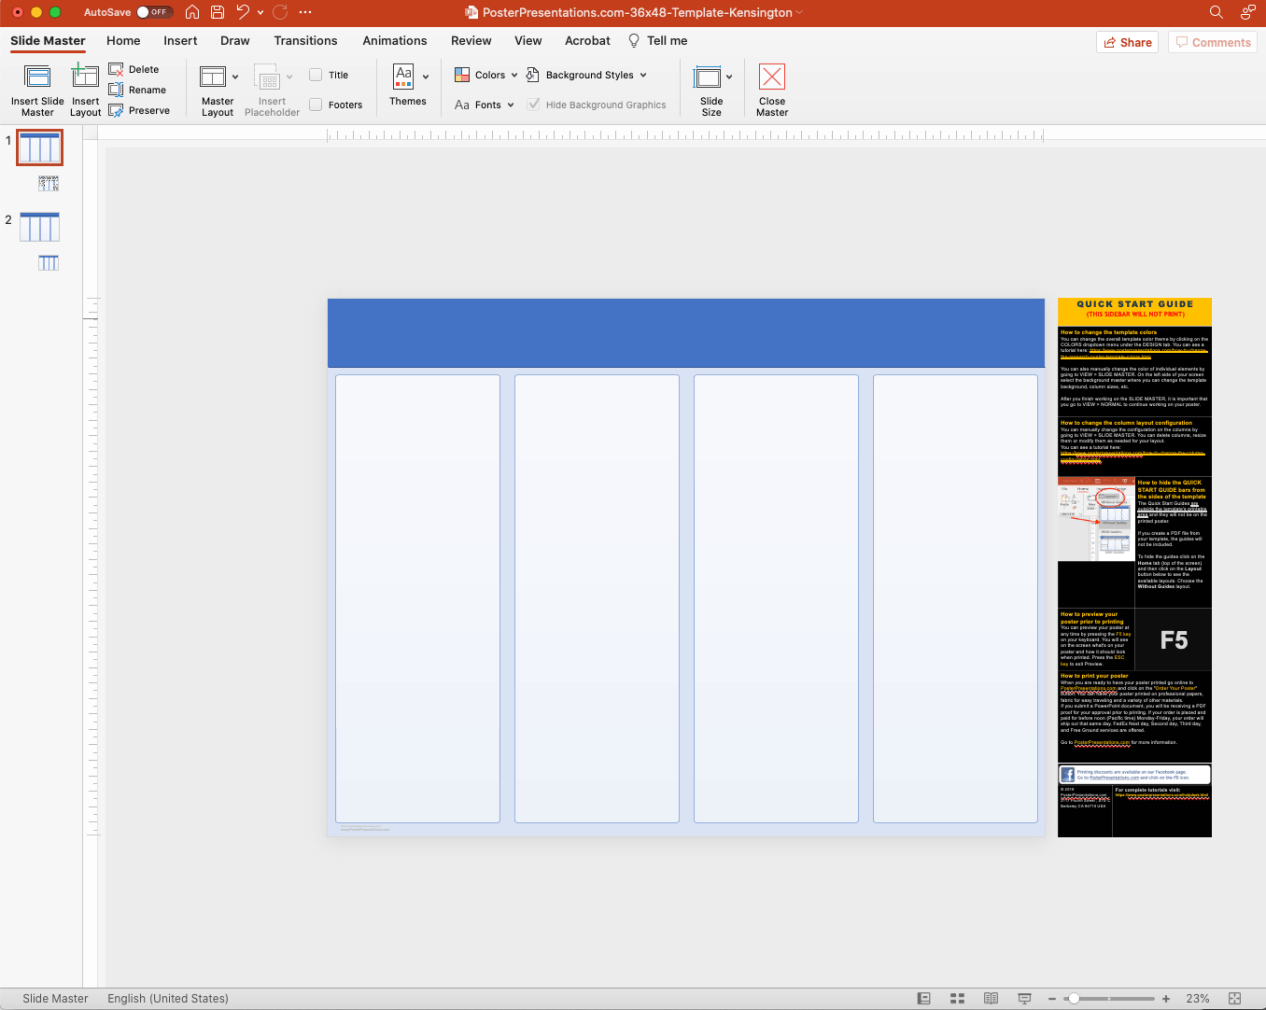 How to delete the Quick Guide bars from the sides of the templates